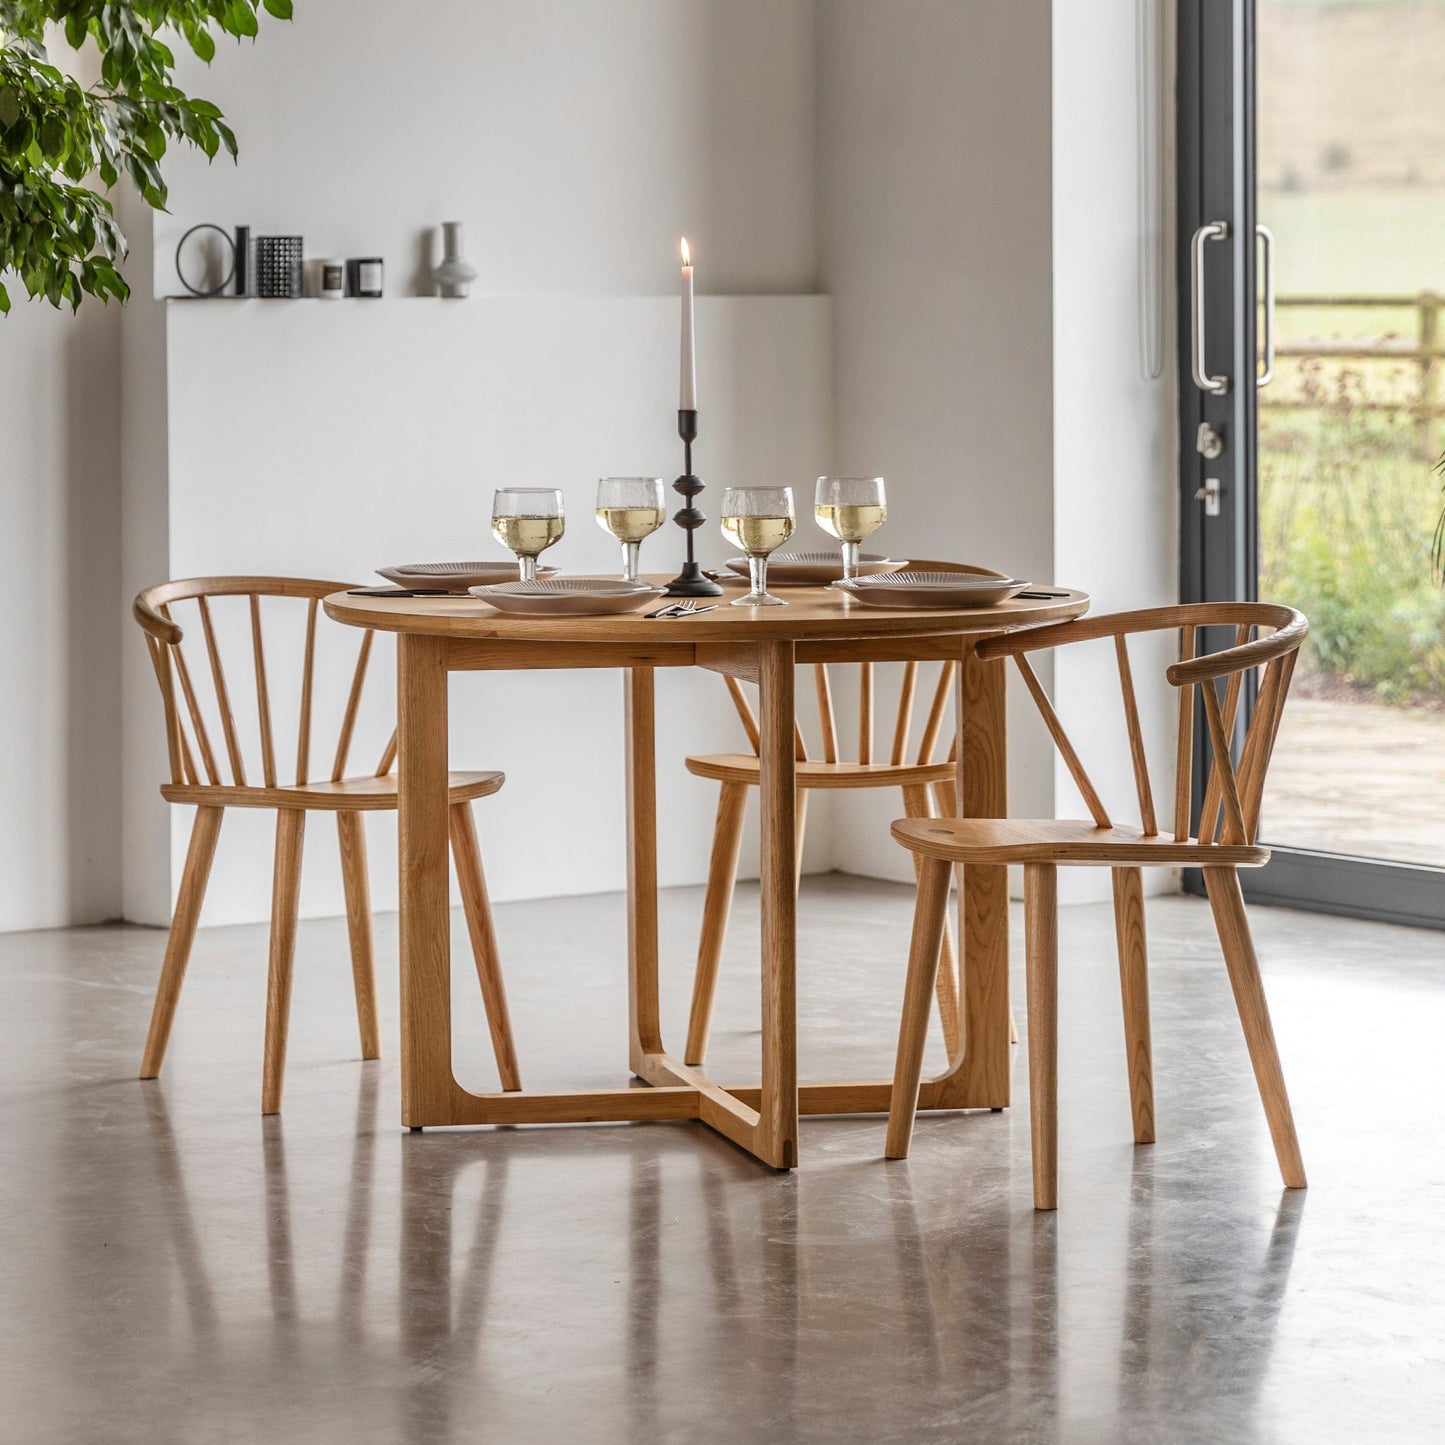 Craft Round Dining Table - Colour Options